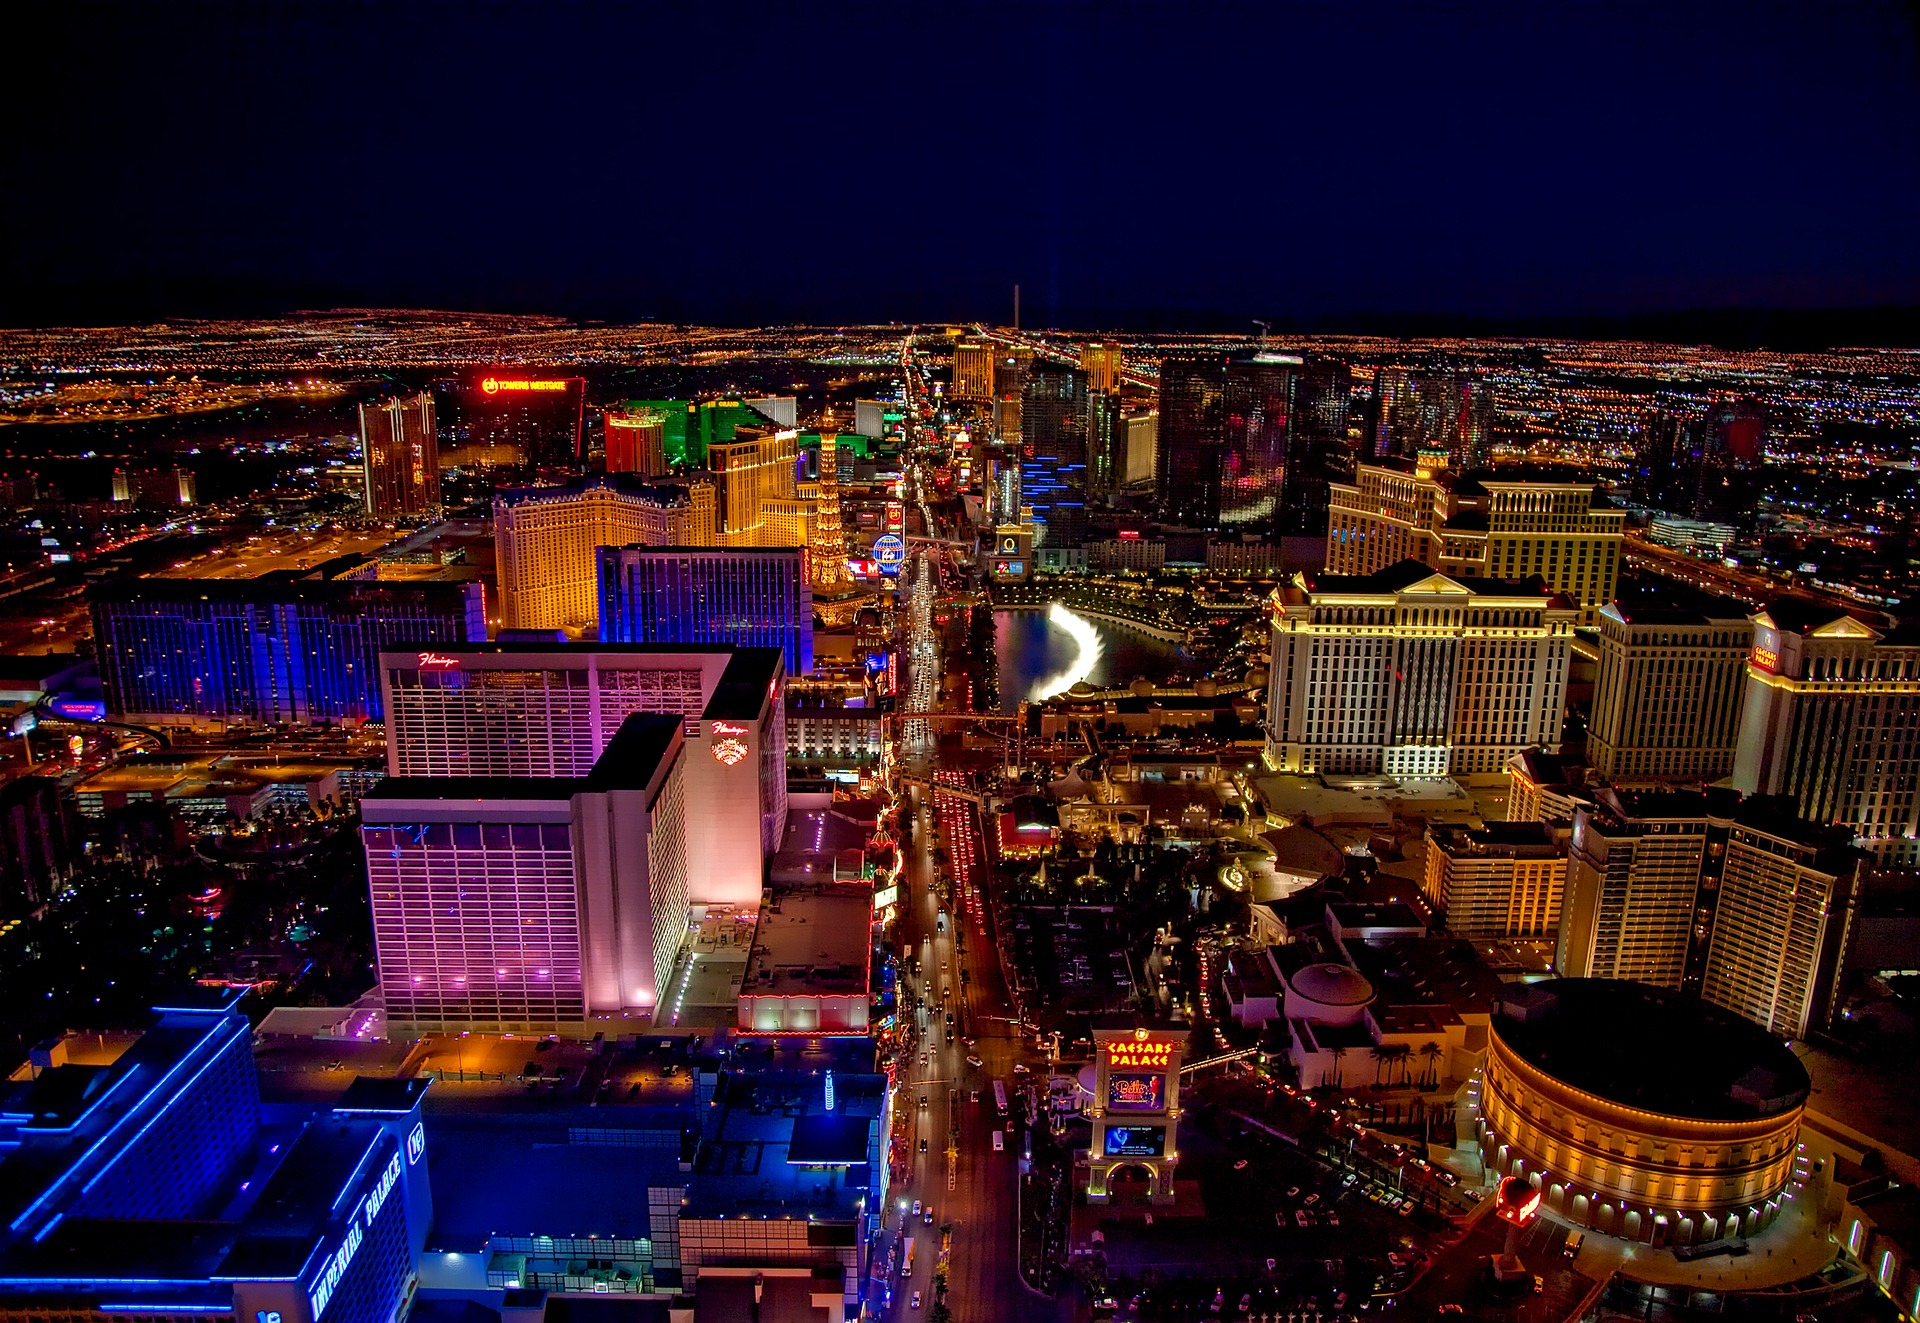 10+ Most Popular Gambling Cities in America, Highly Recommended to Visit